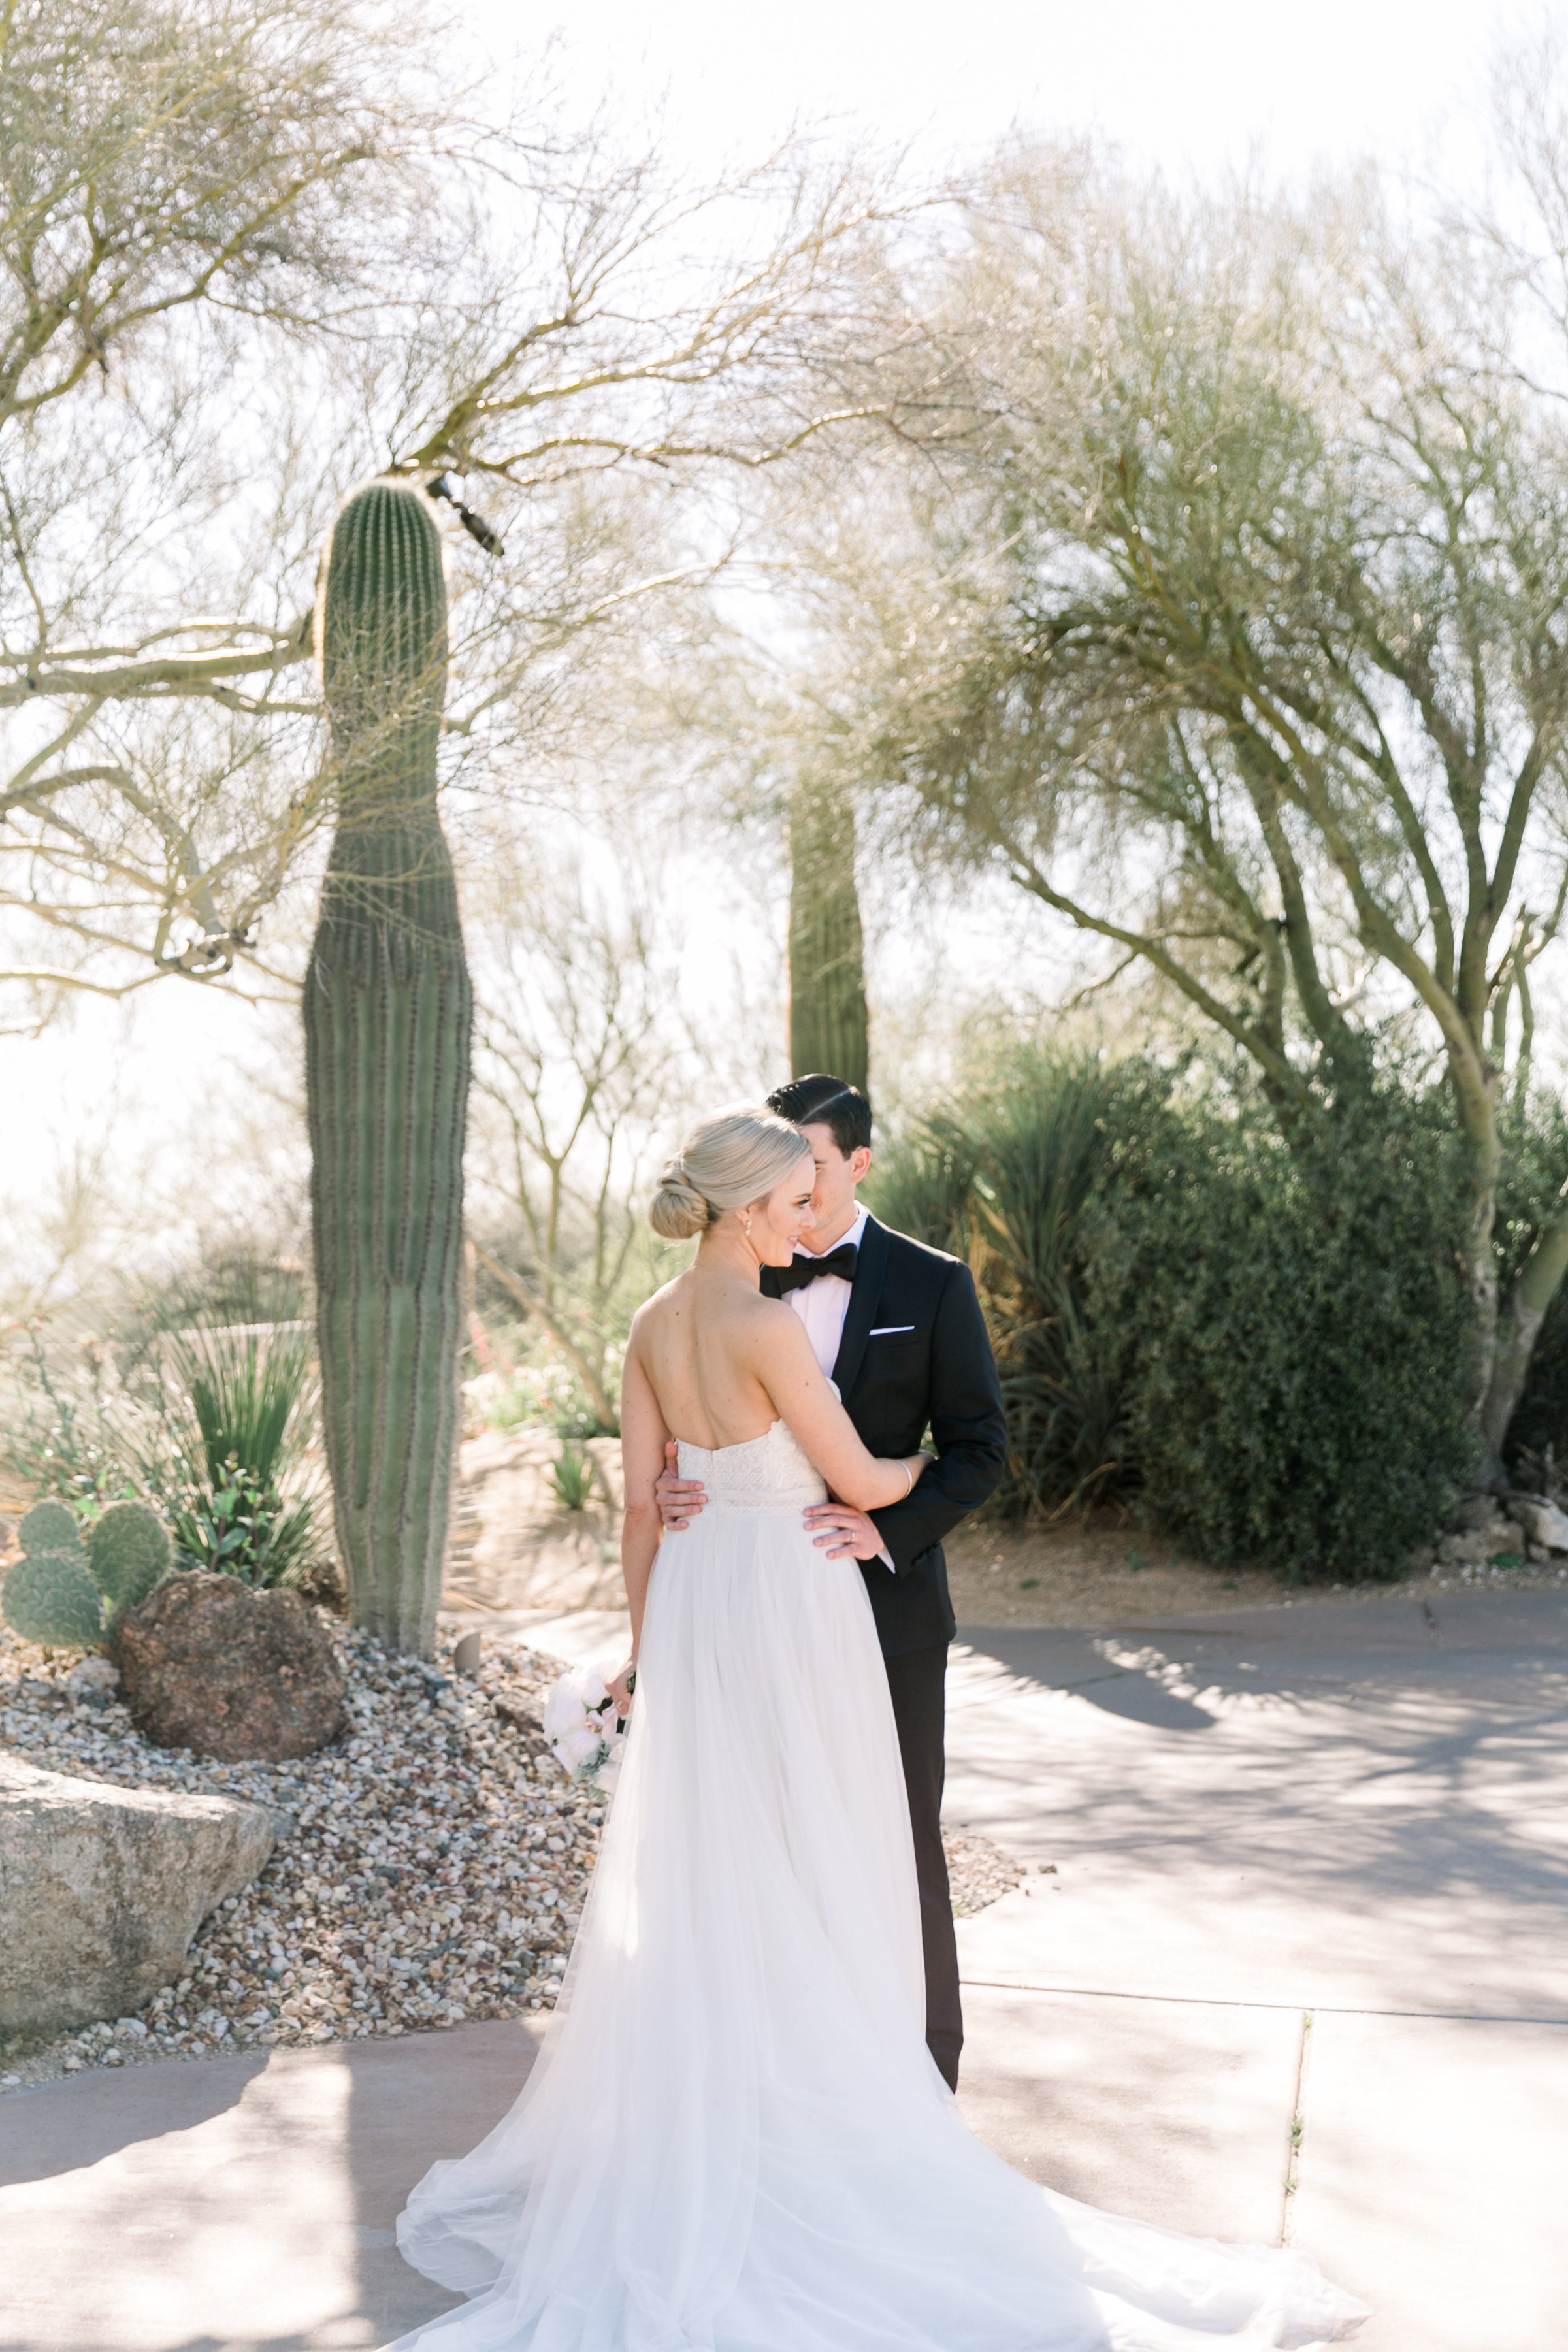 Karlie Colleen Photography - Arizona Wedding at The Troon Scottsdale Country Club - Paige & Shane -209